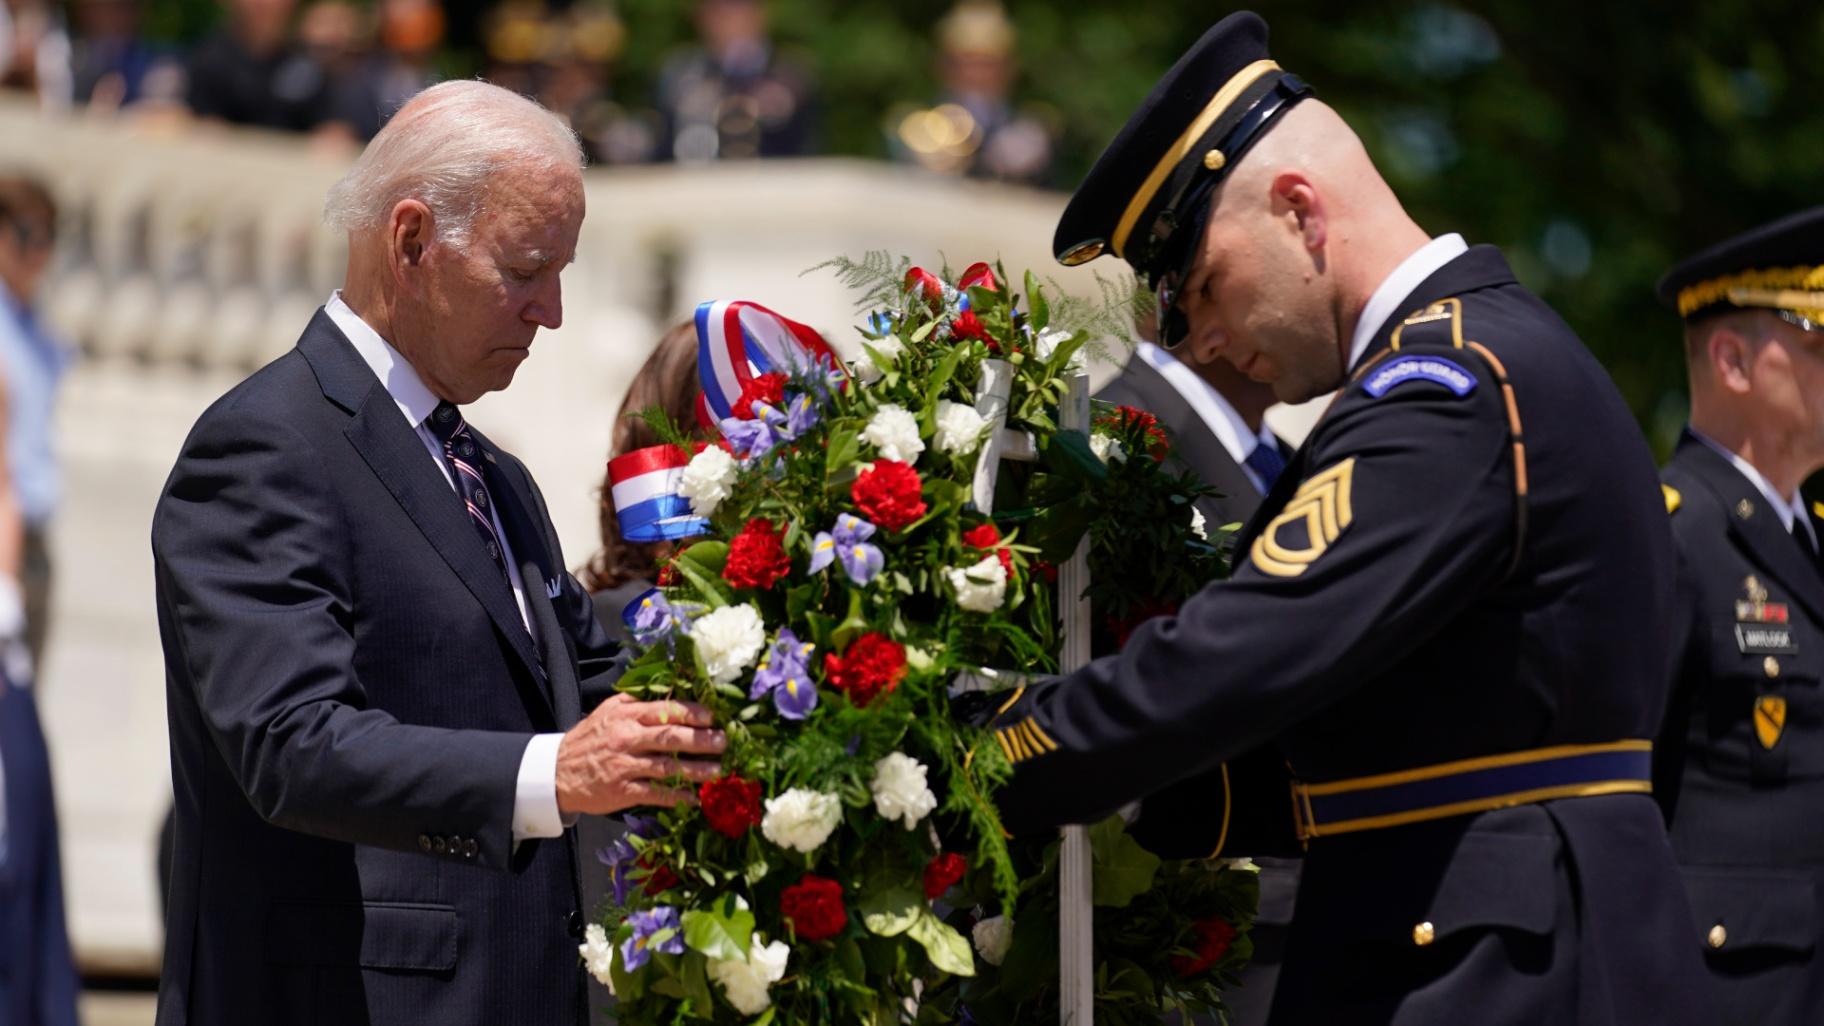 President Joe Biden lays a wreath at The Tomb of the Unknown Soldier at Arlington National Cemetery on Memorial Day, Monday, May 30, 2022, in Arlington, Va. (AP Photo / Andrew Harnik)